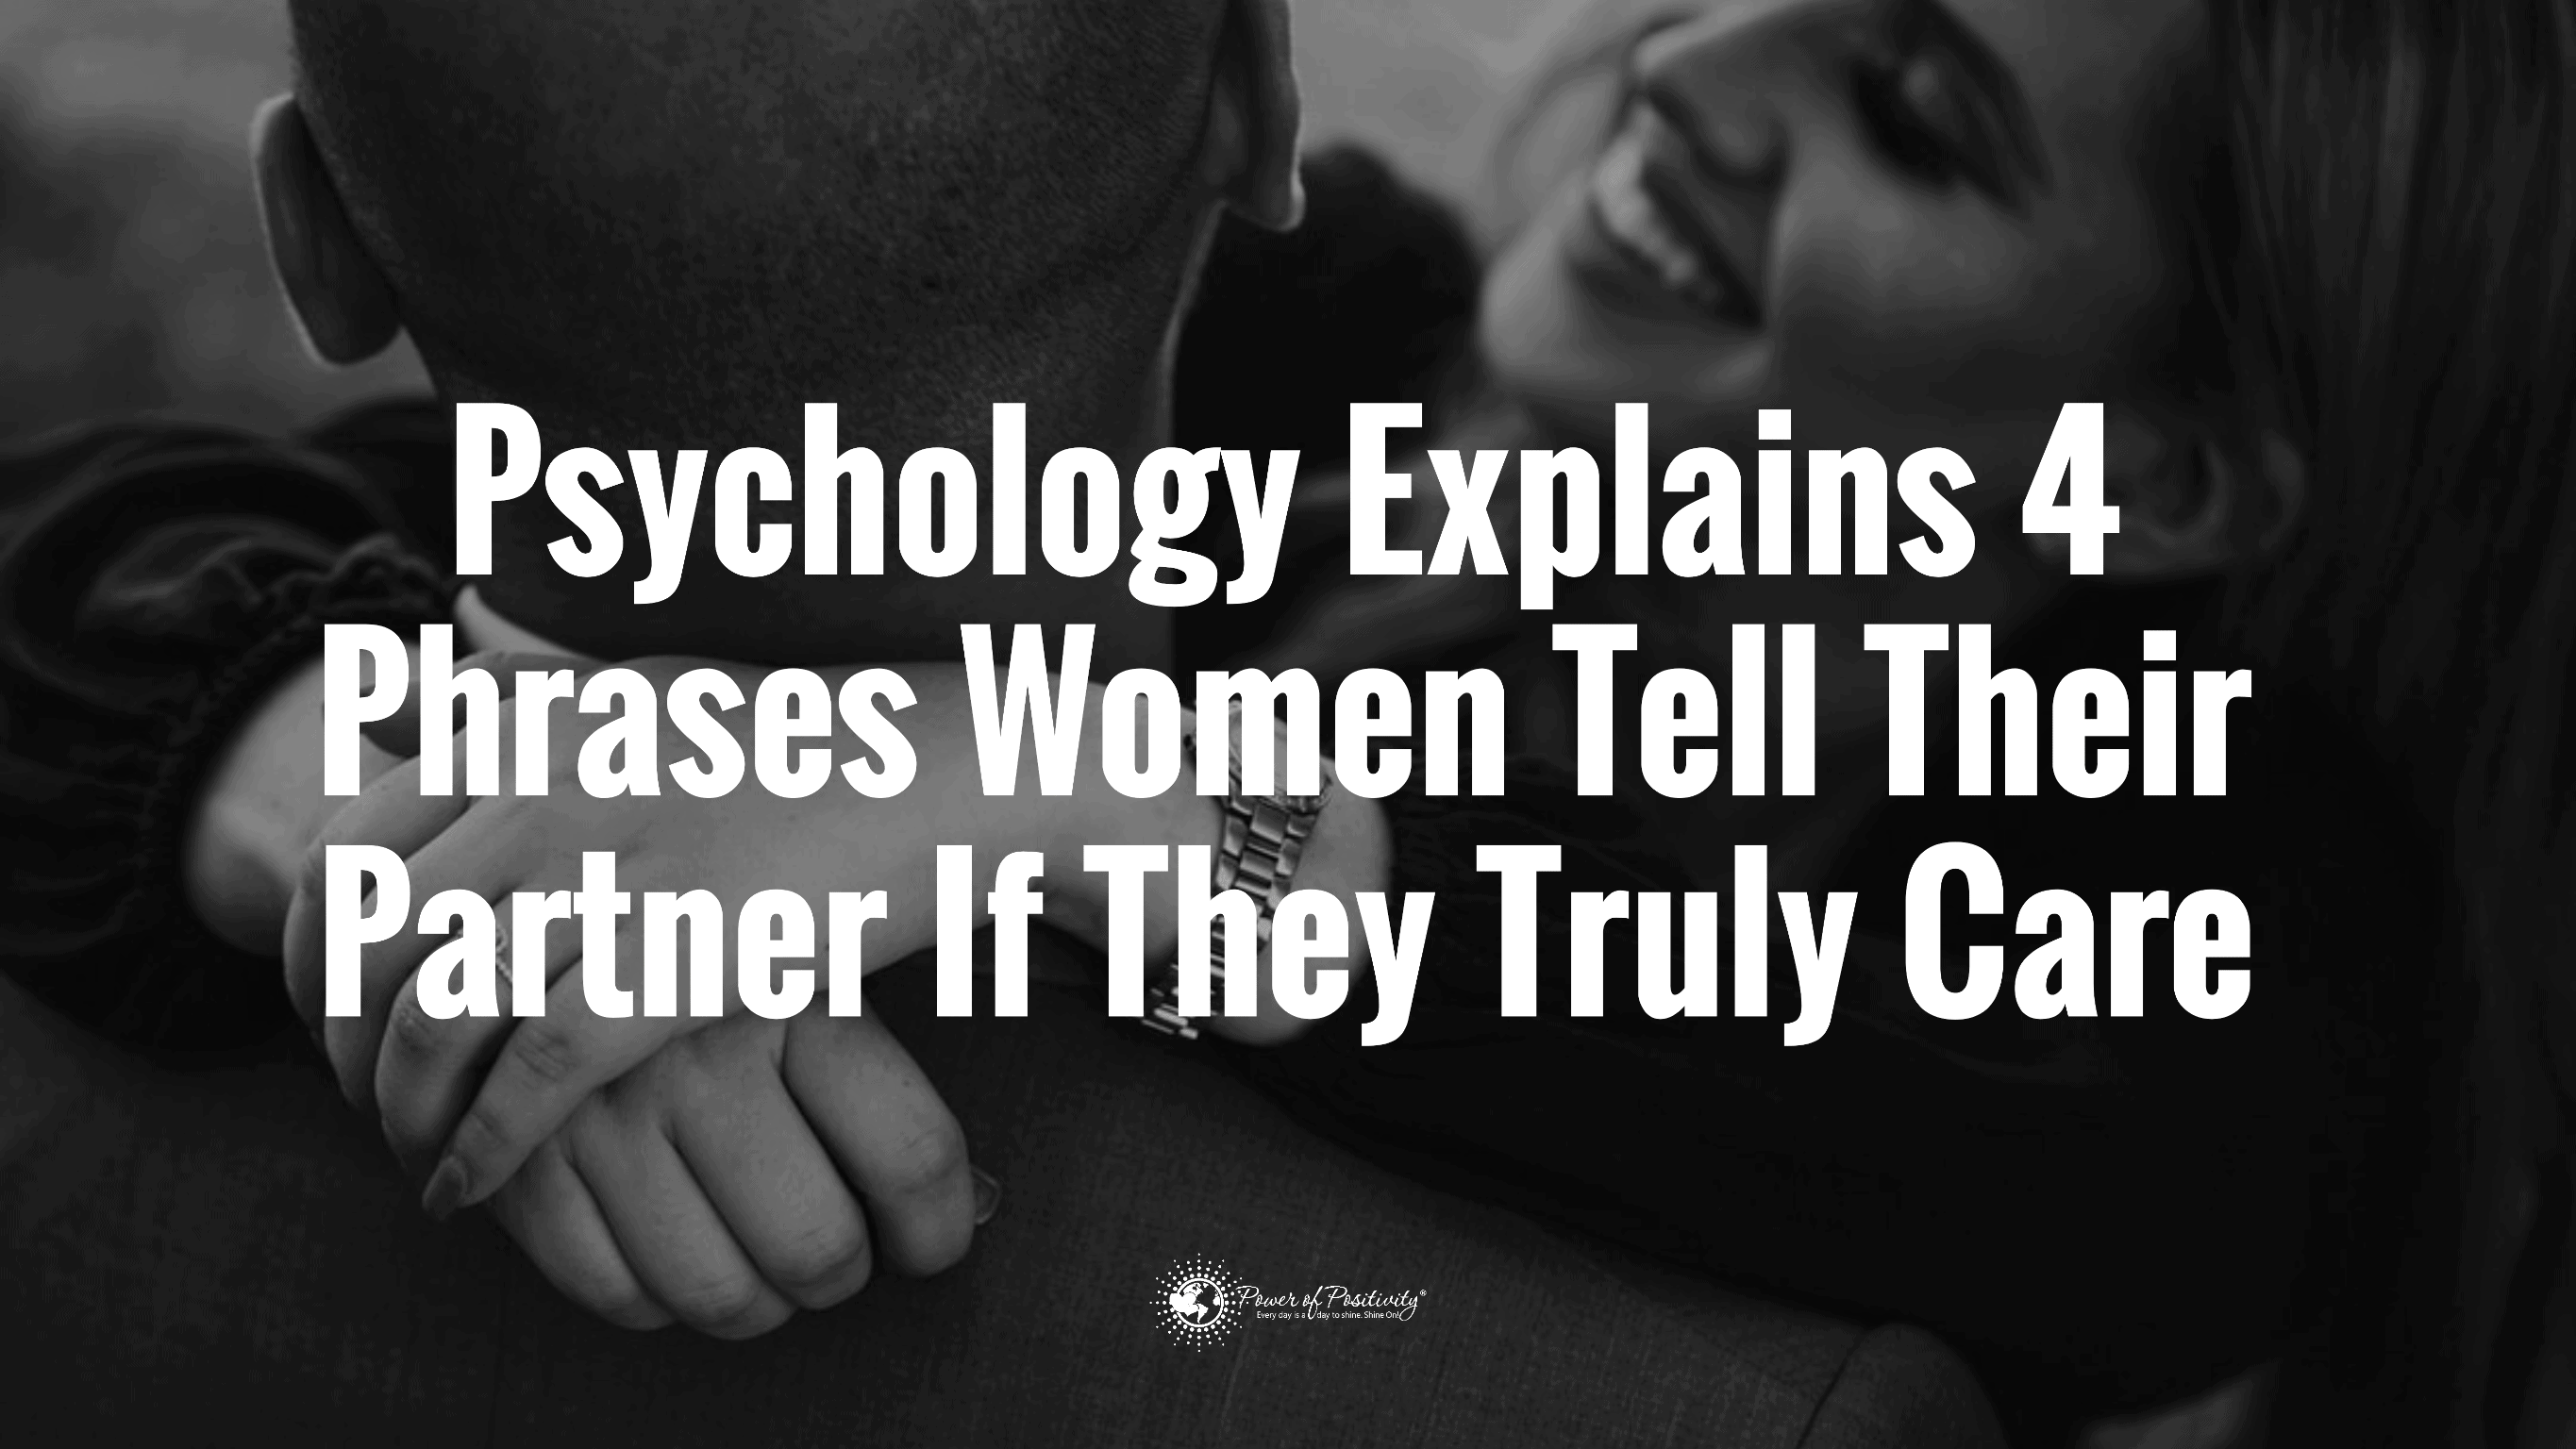 Psychology Explains 4 Phrases Women Tell Their Partner If They Truly Care